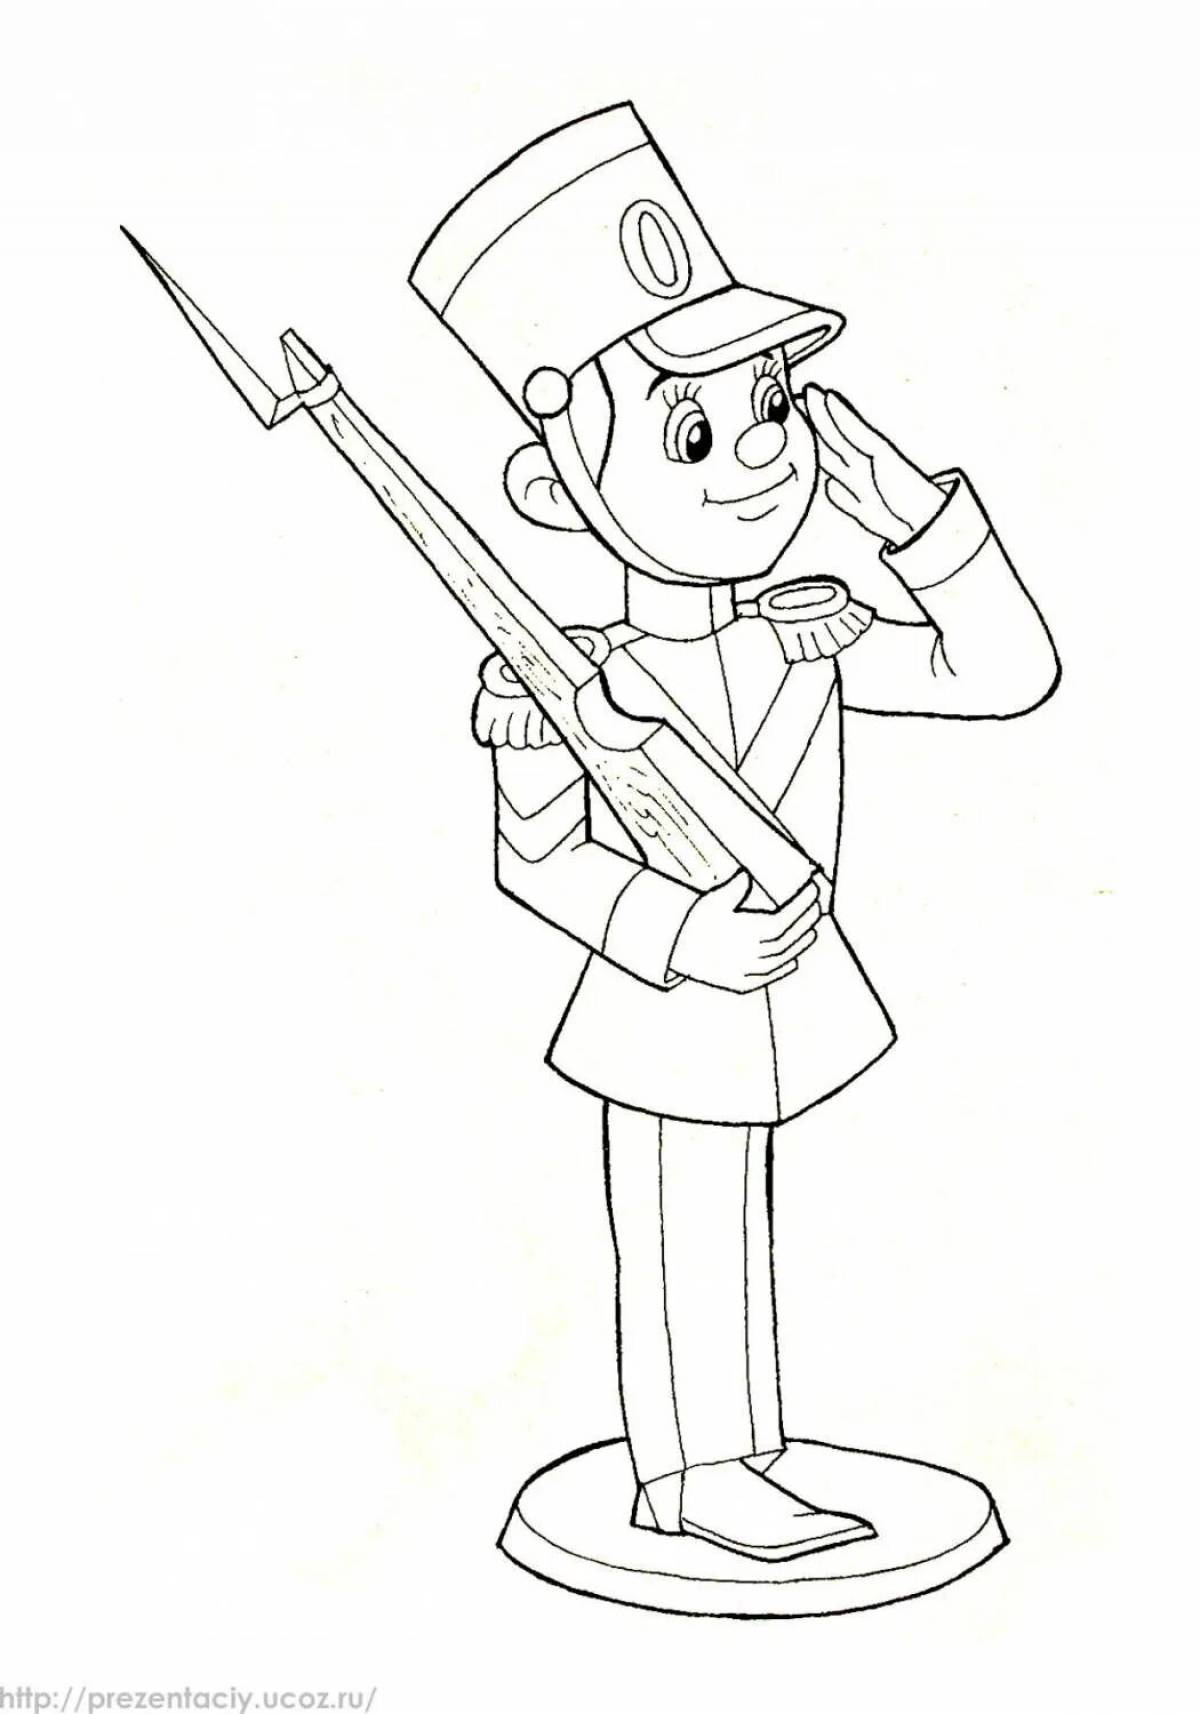 Cute tin soldiers coloring book